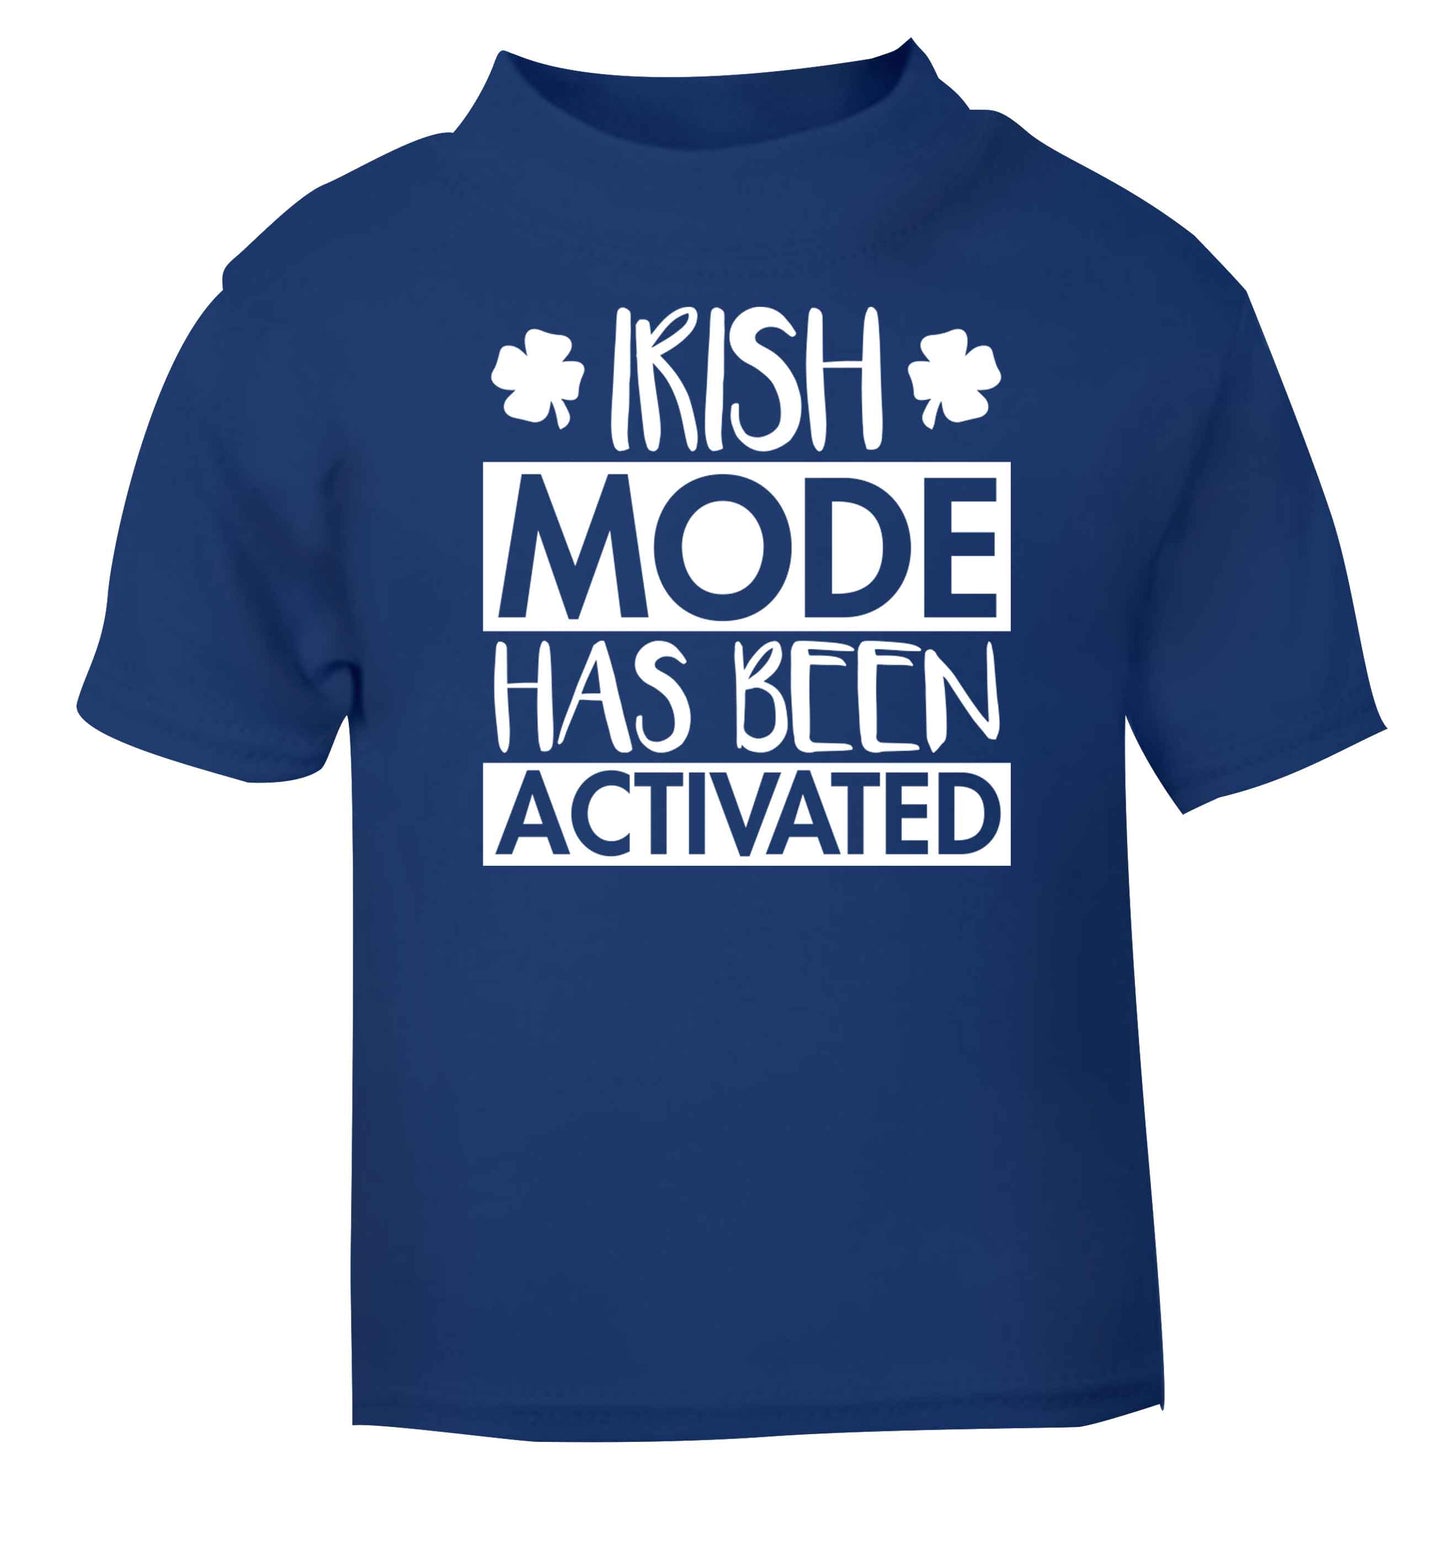 Irish mode has been activated blue baby toddler Tshirt 2 Years